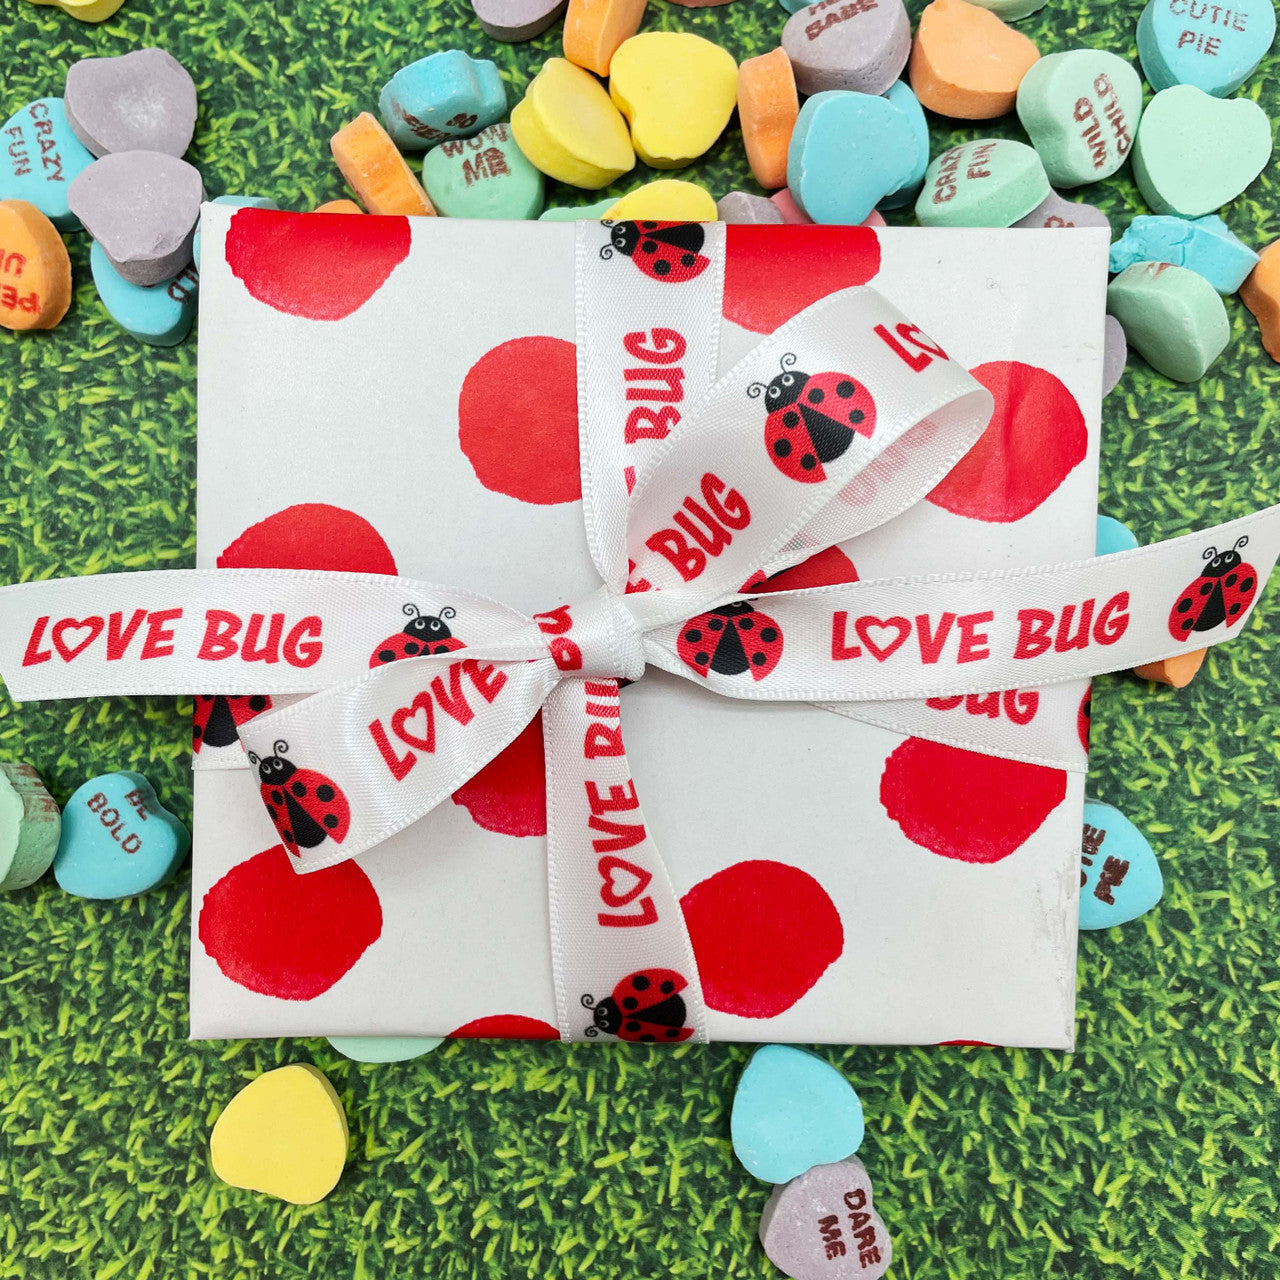 Our sweet little love bugs ribbon makes a gift extra fun!